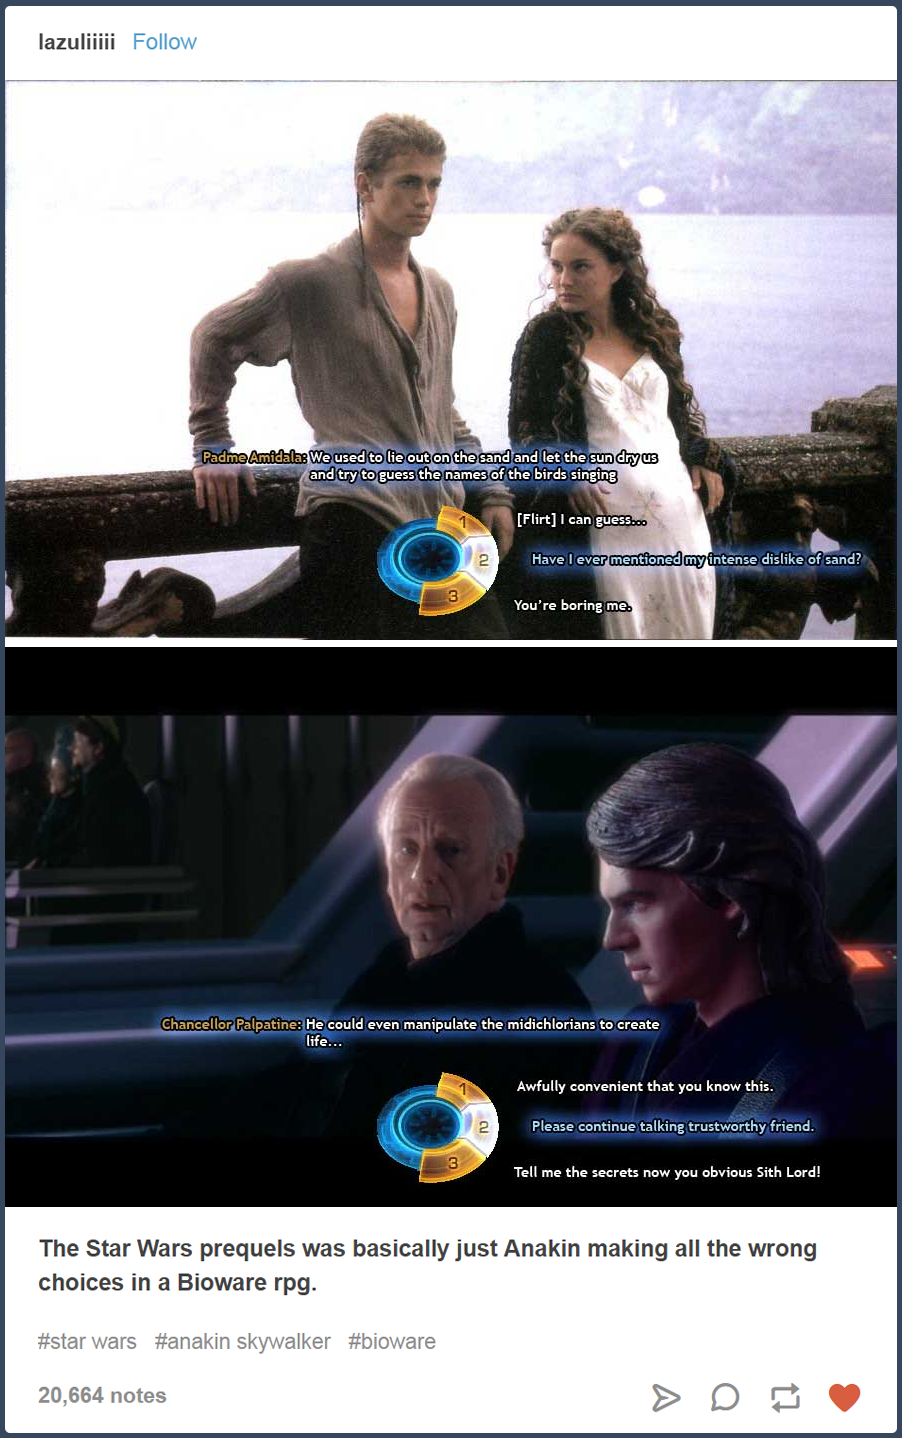 Funny meme pointing out that the first few episodes of Star Wars is just Anakin making bad choices in a role playing game.